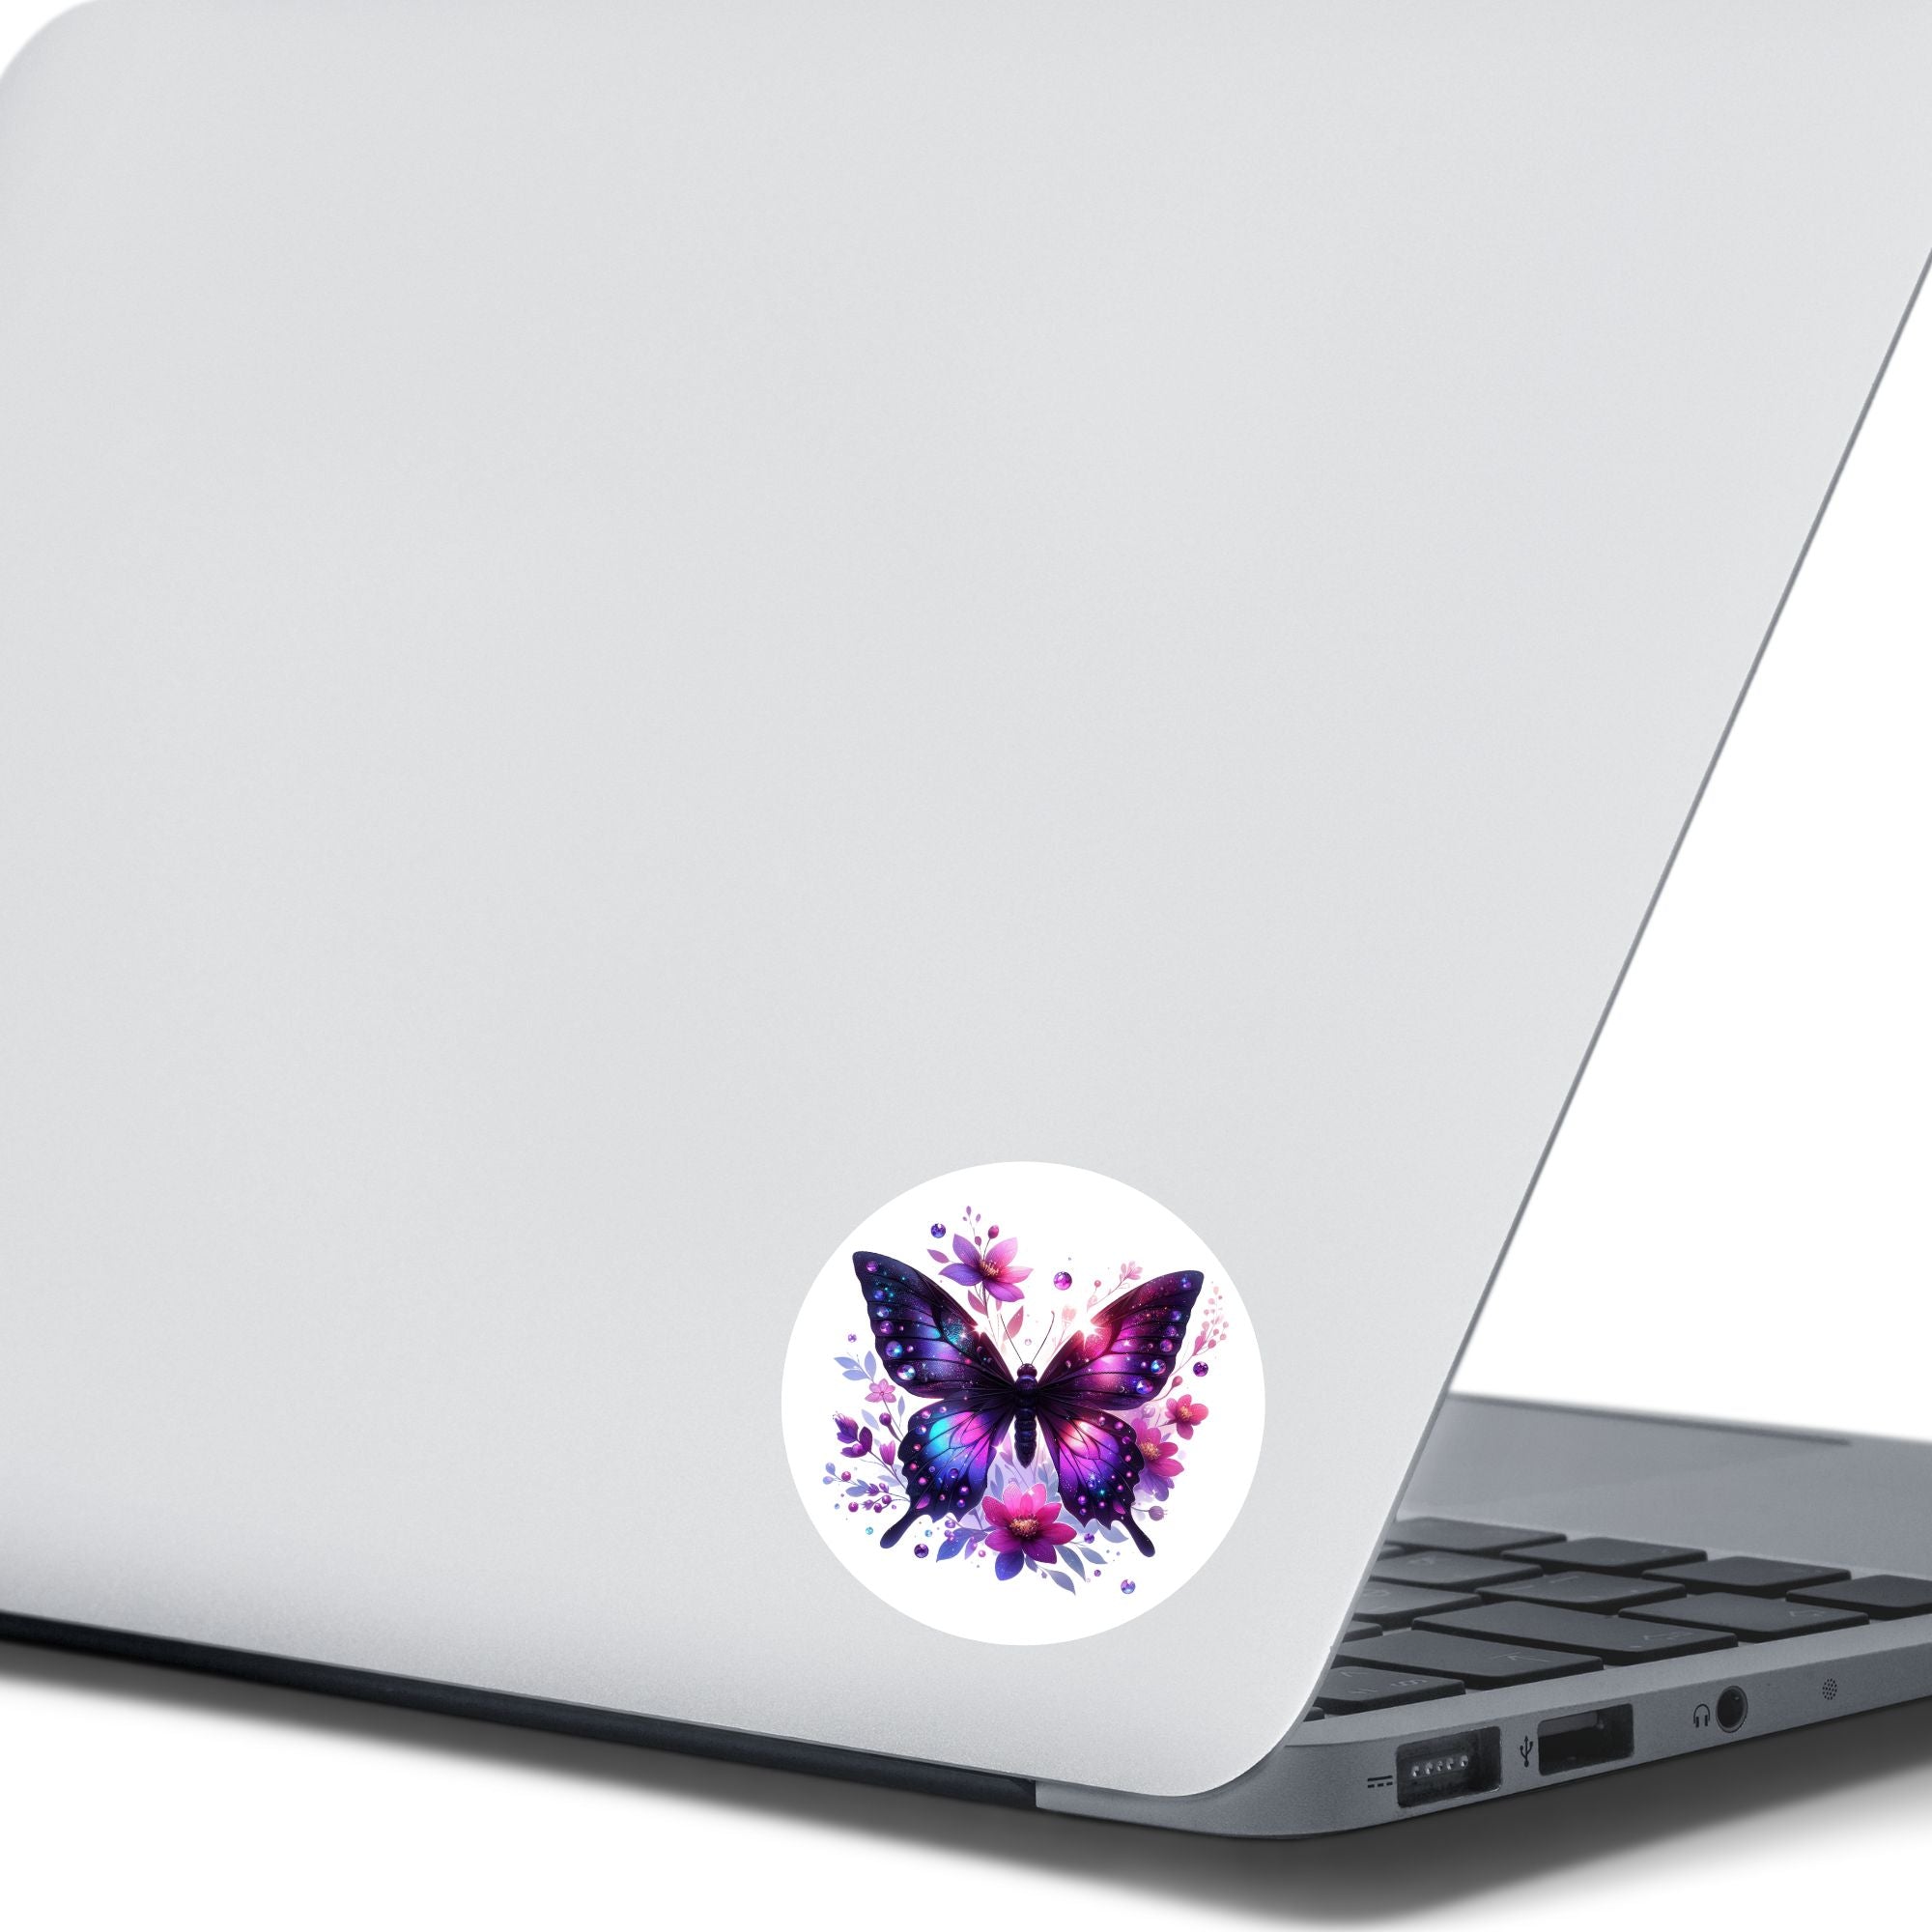 This image shows the Purple Butterfly with Stars die cut sticker on the back of an open laptop.